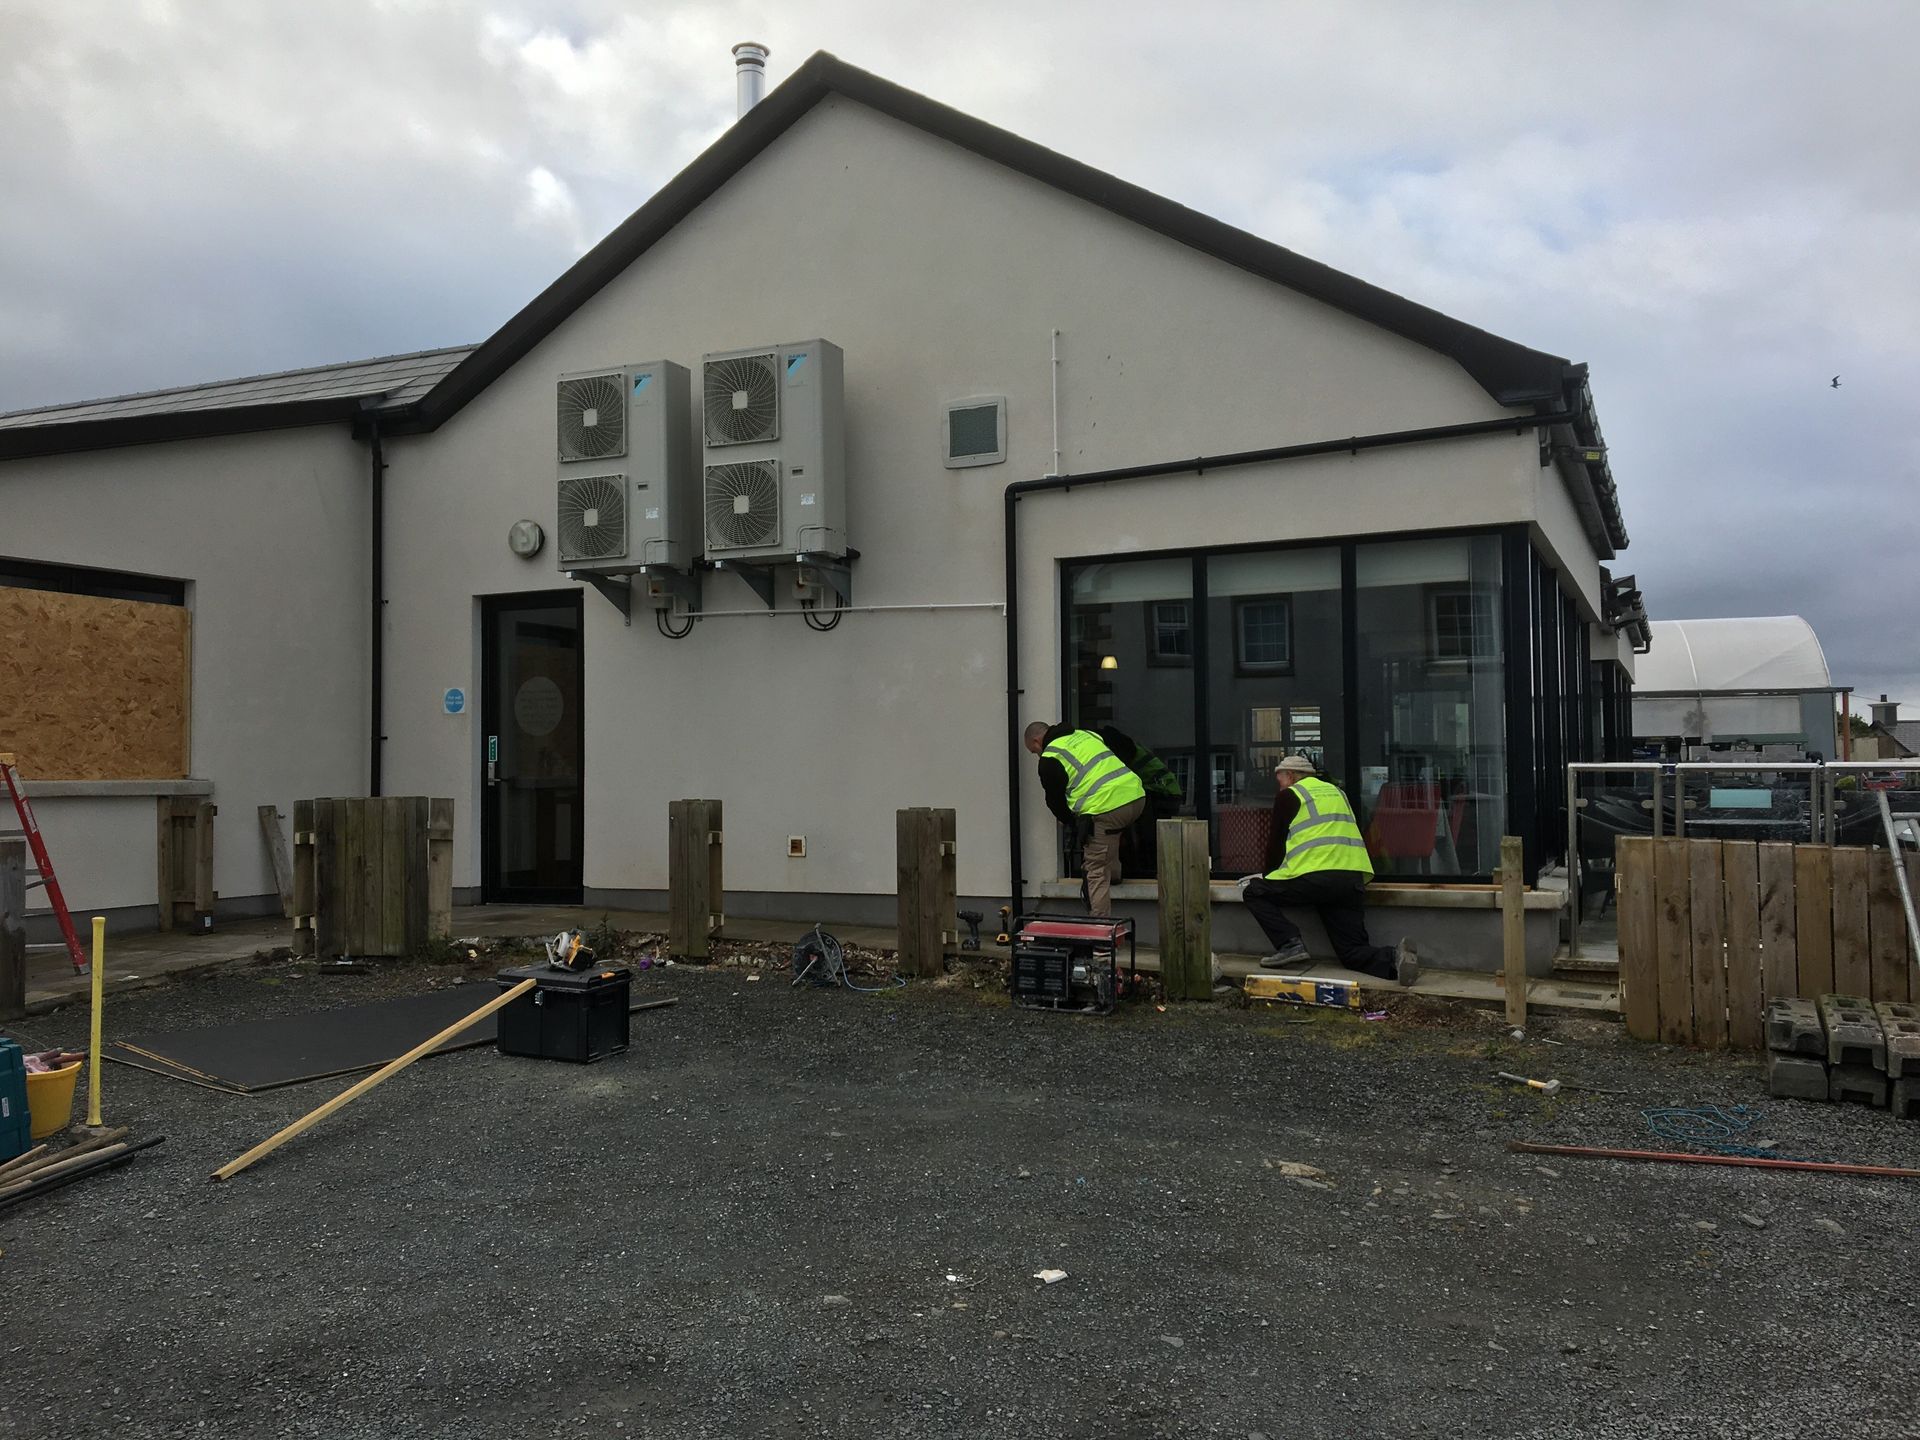 Building work at Harrisons